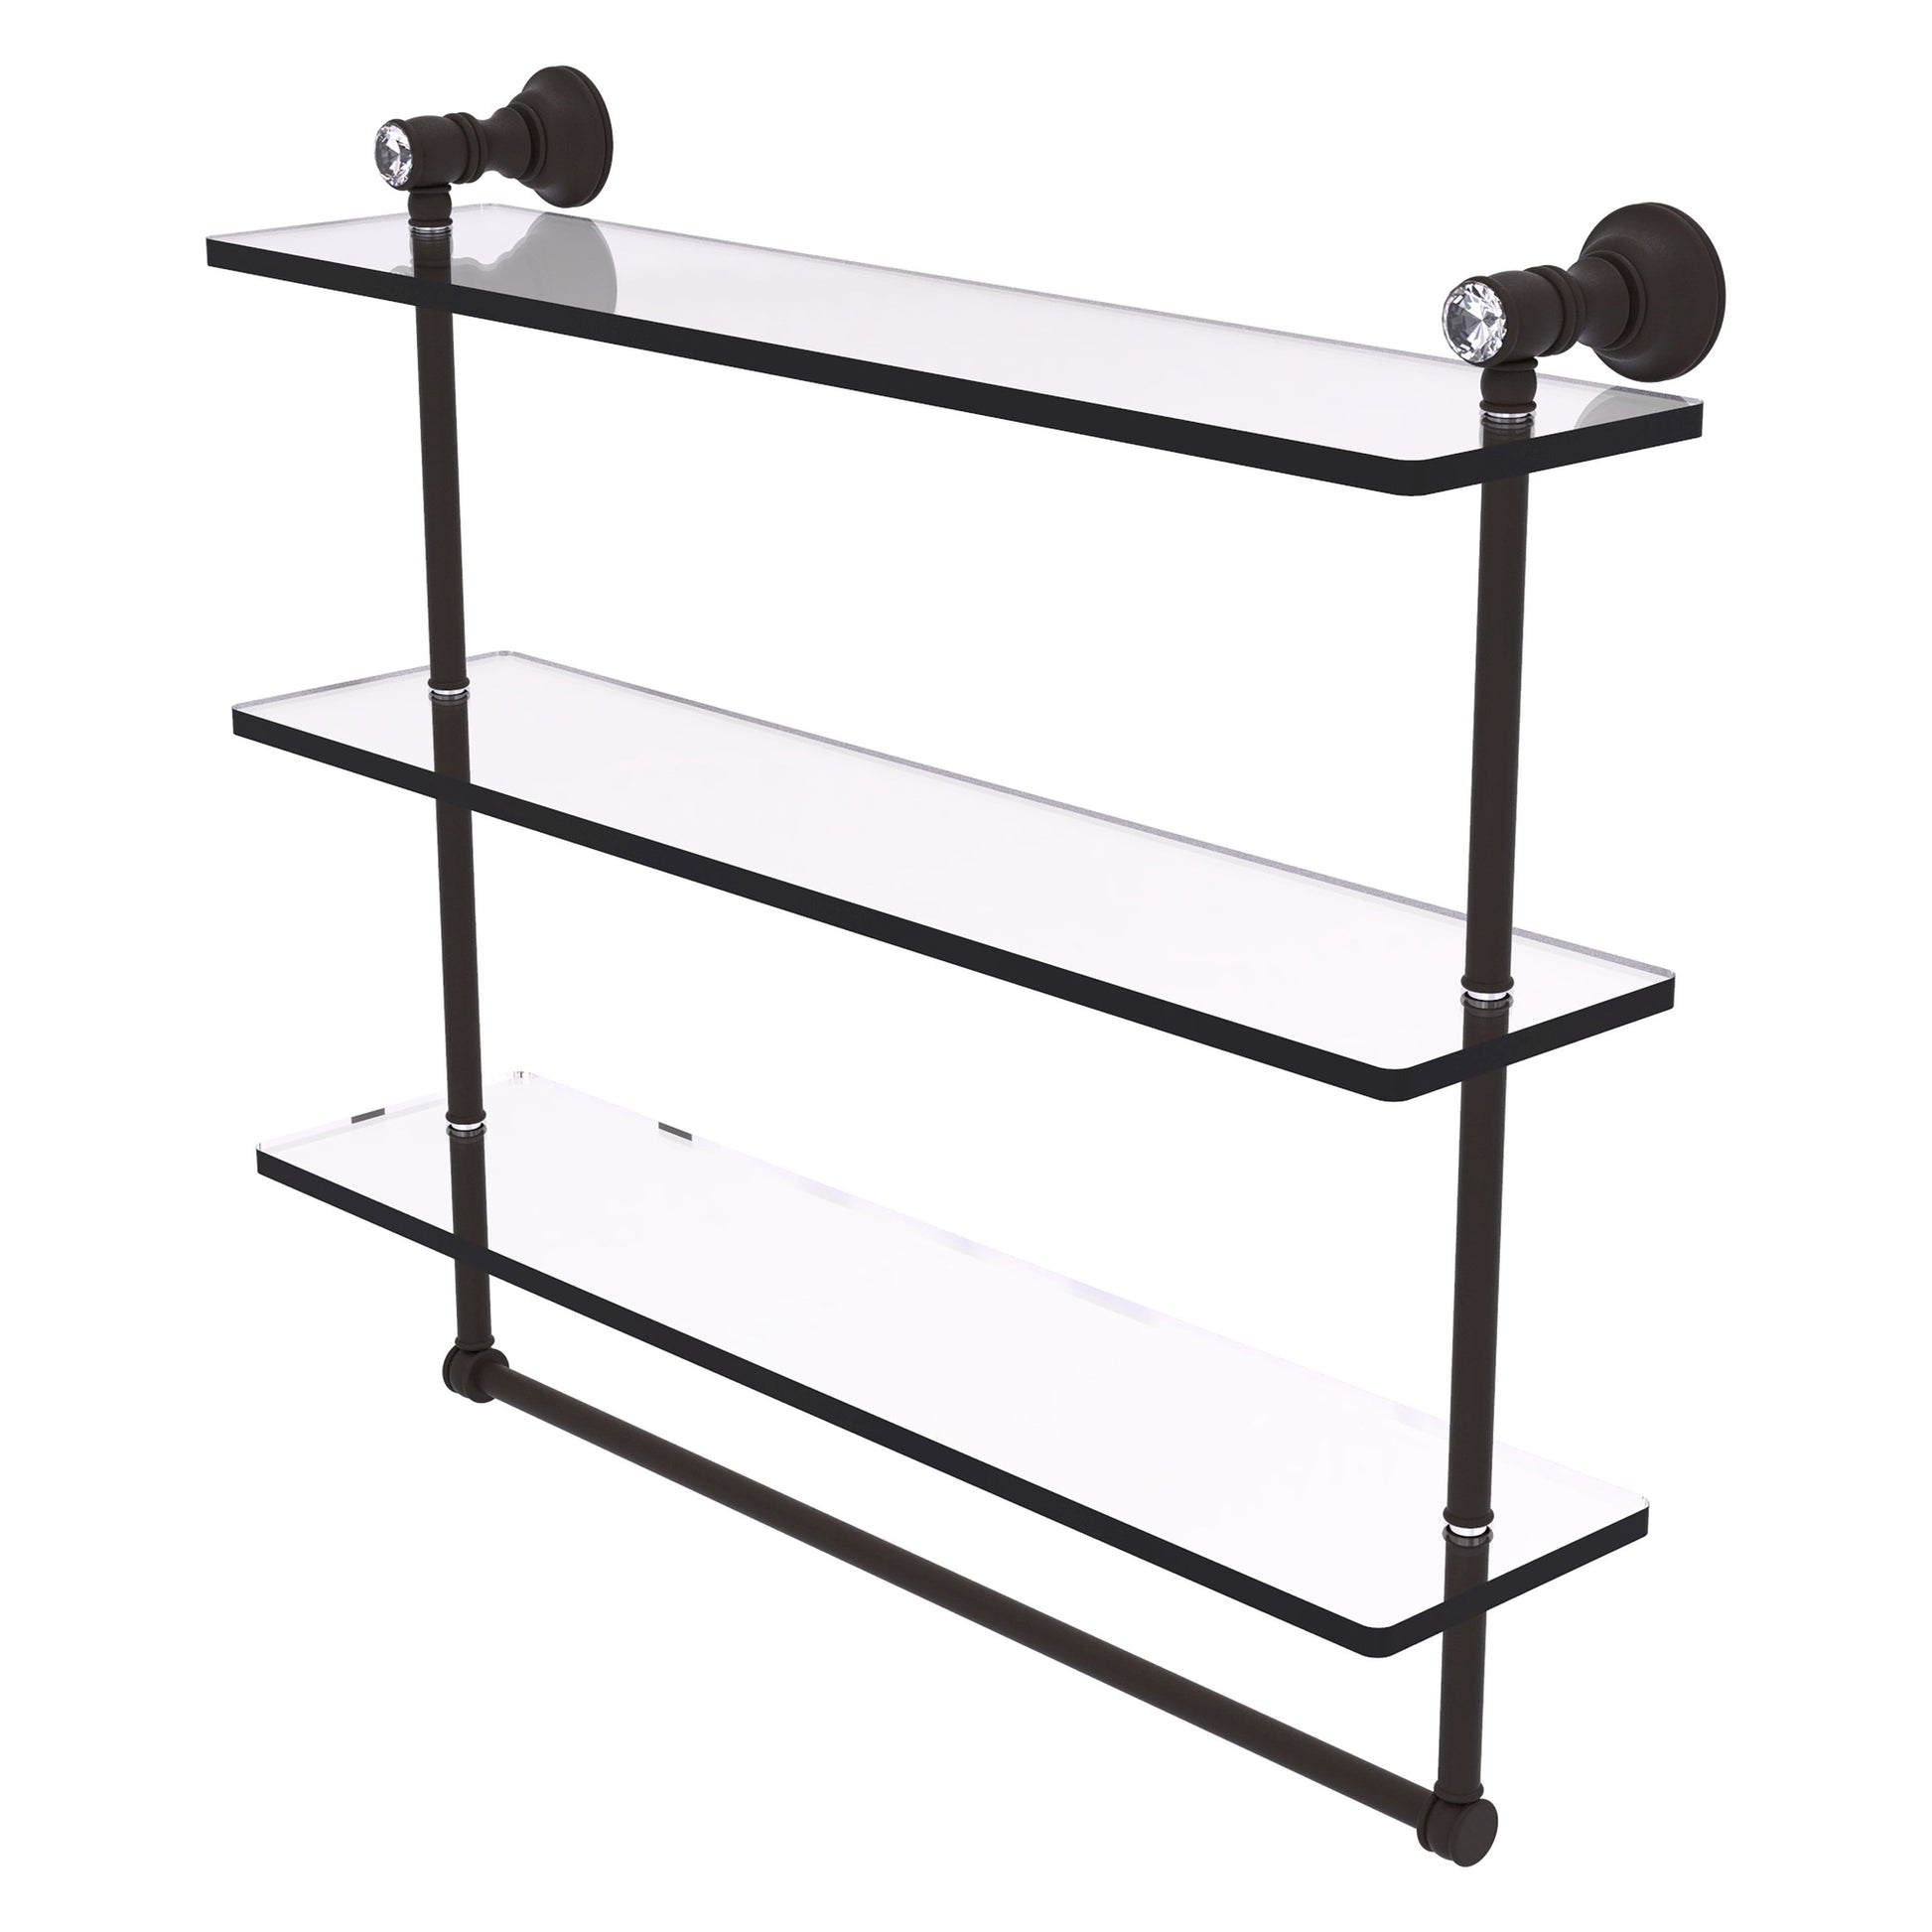 24 Inch Glass Shelf with Rail & Hooks for Bathroom - Oil Rubbed